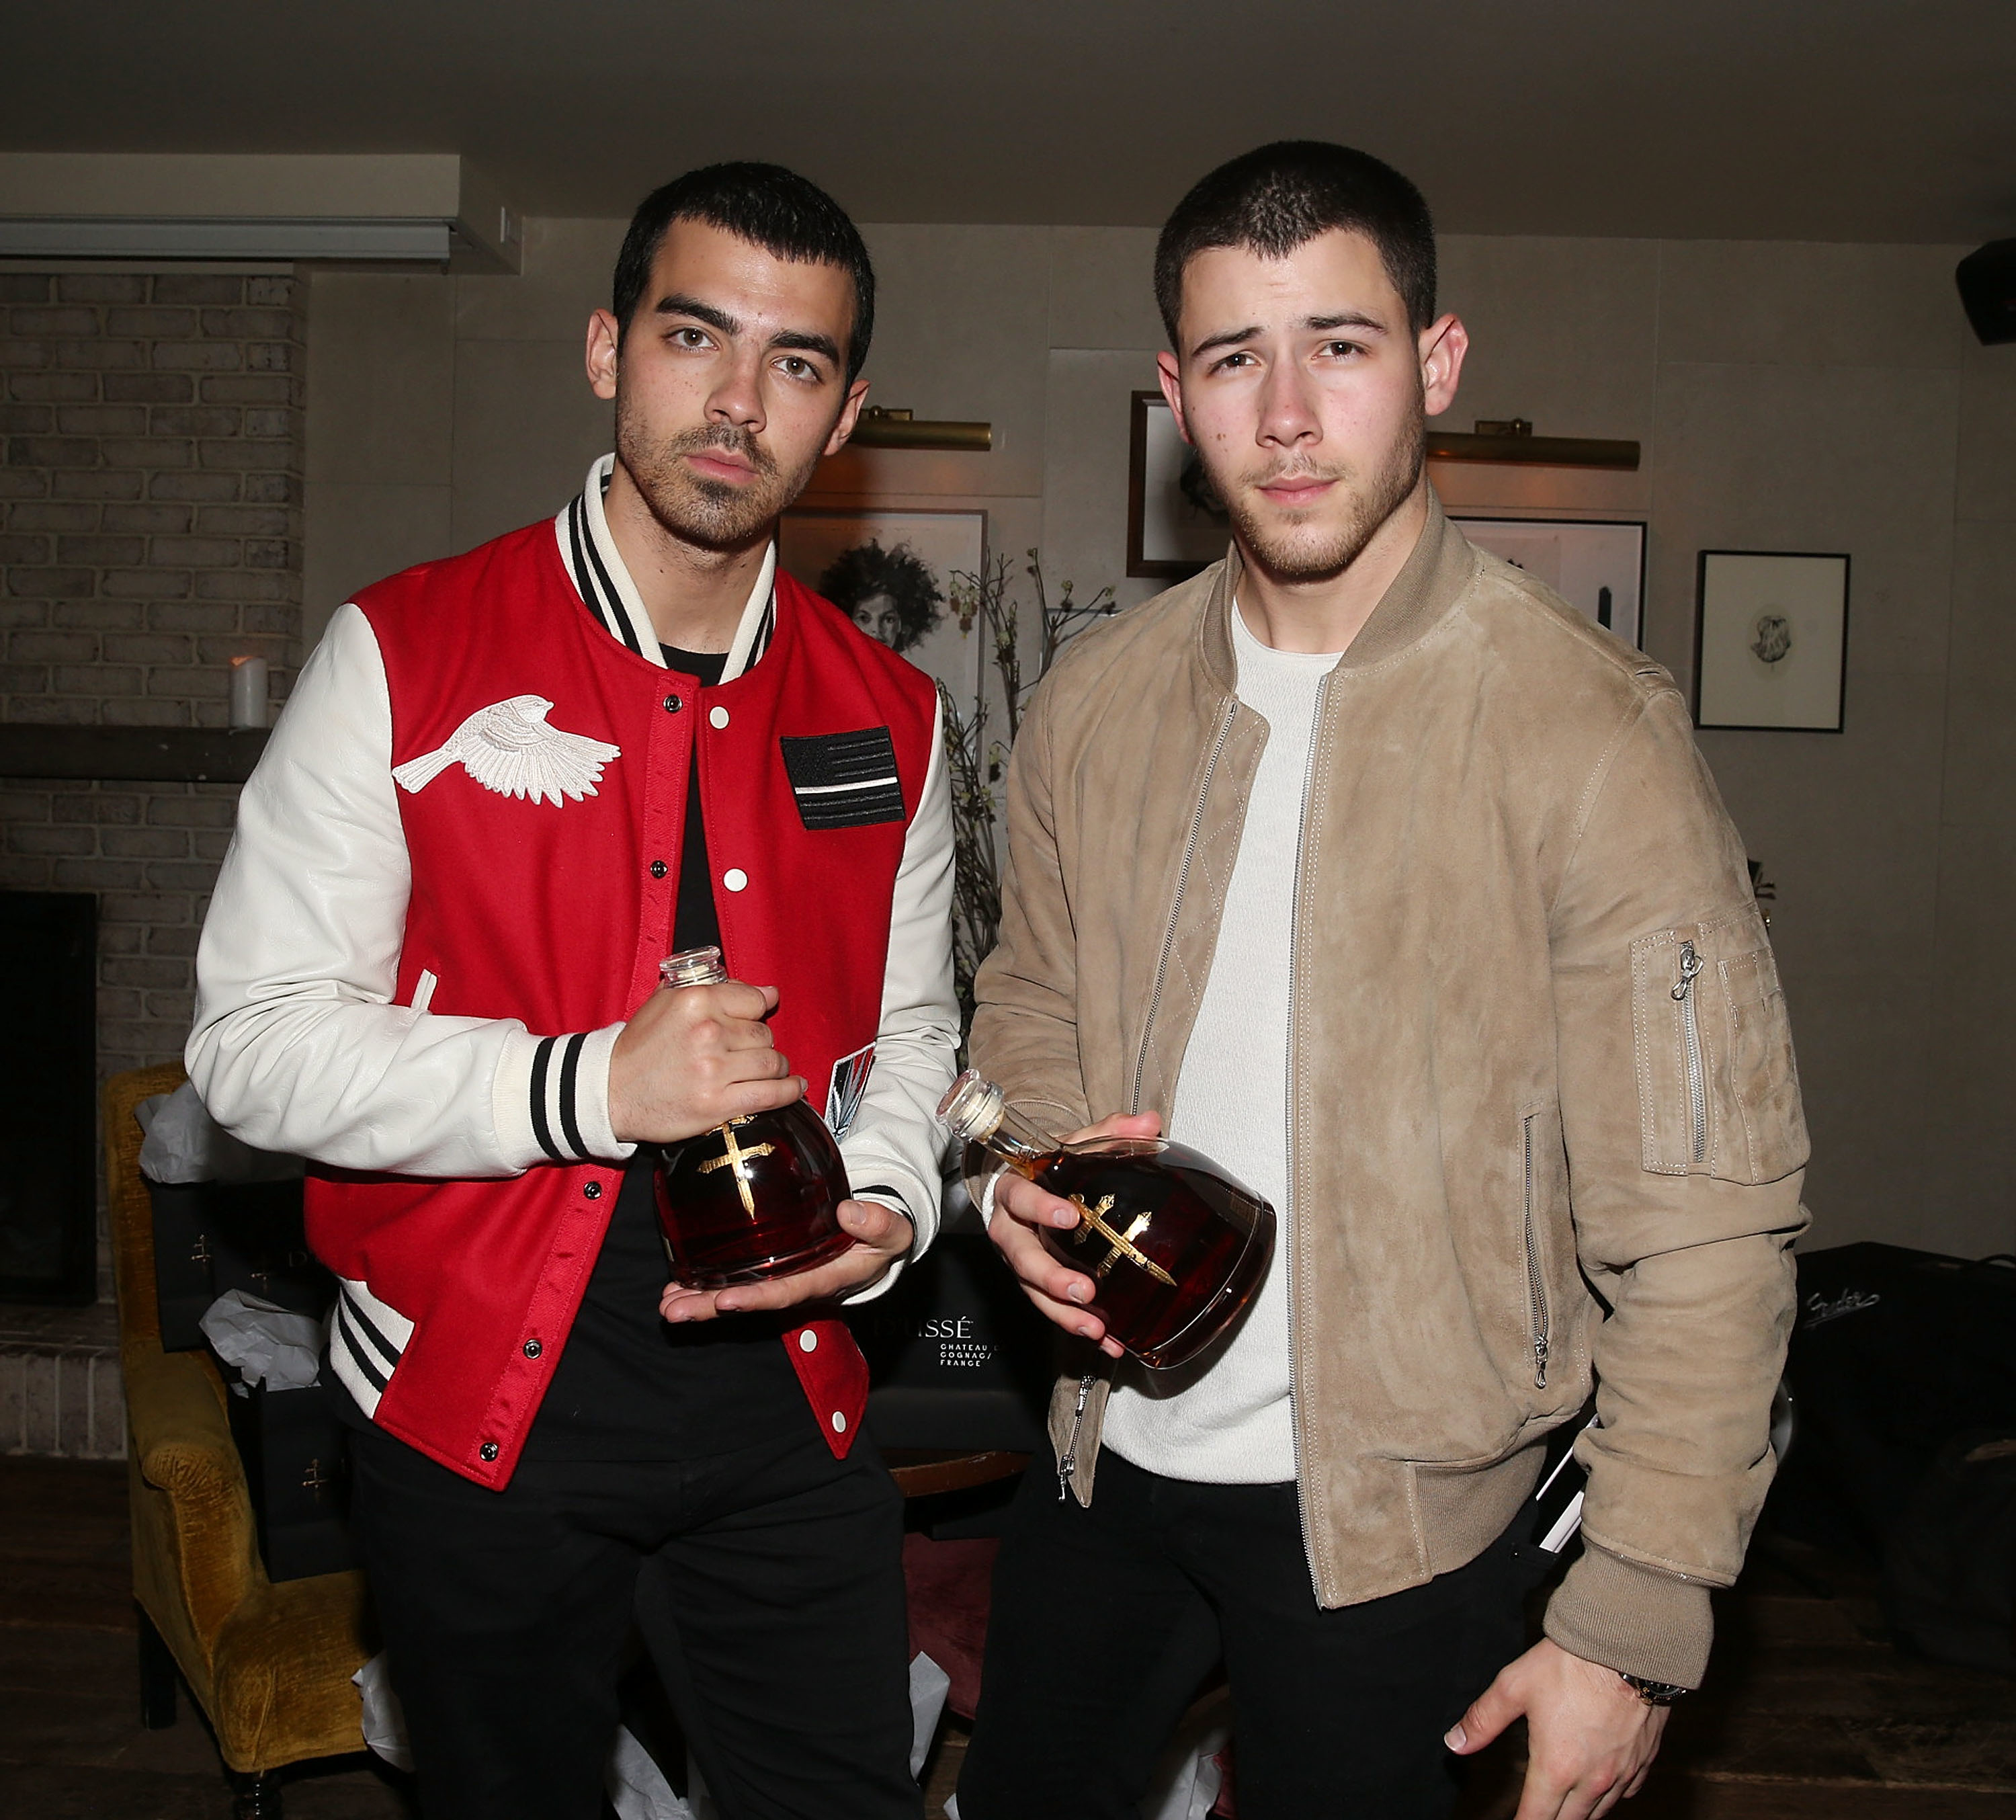 nick and joe at an event holding bottles of liquor